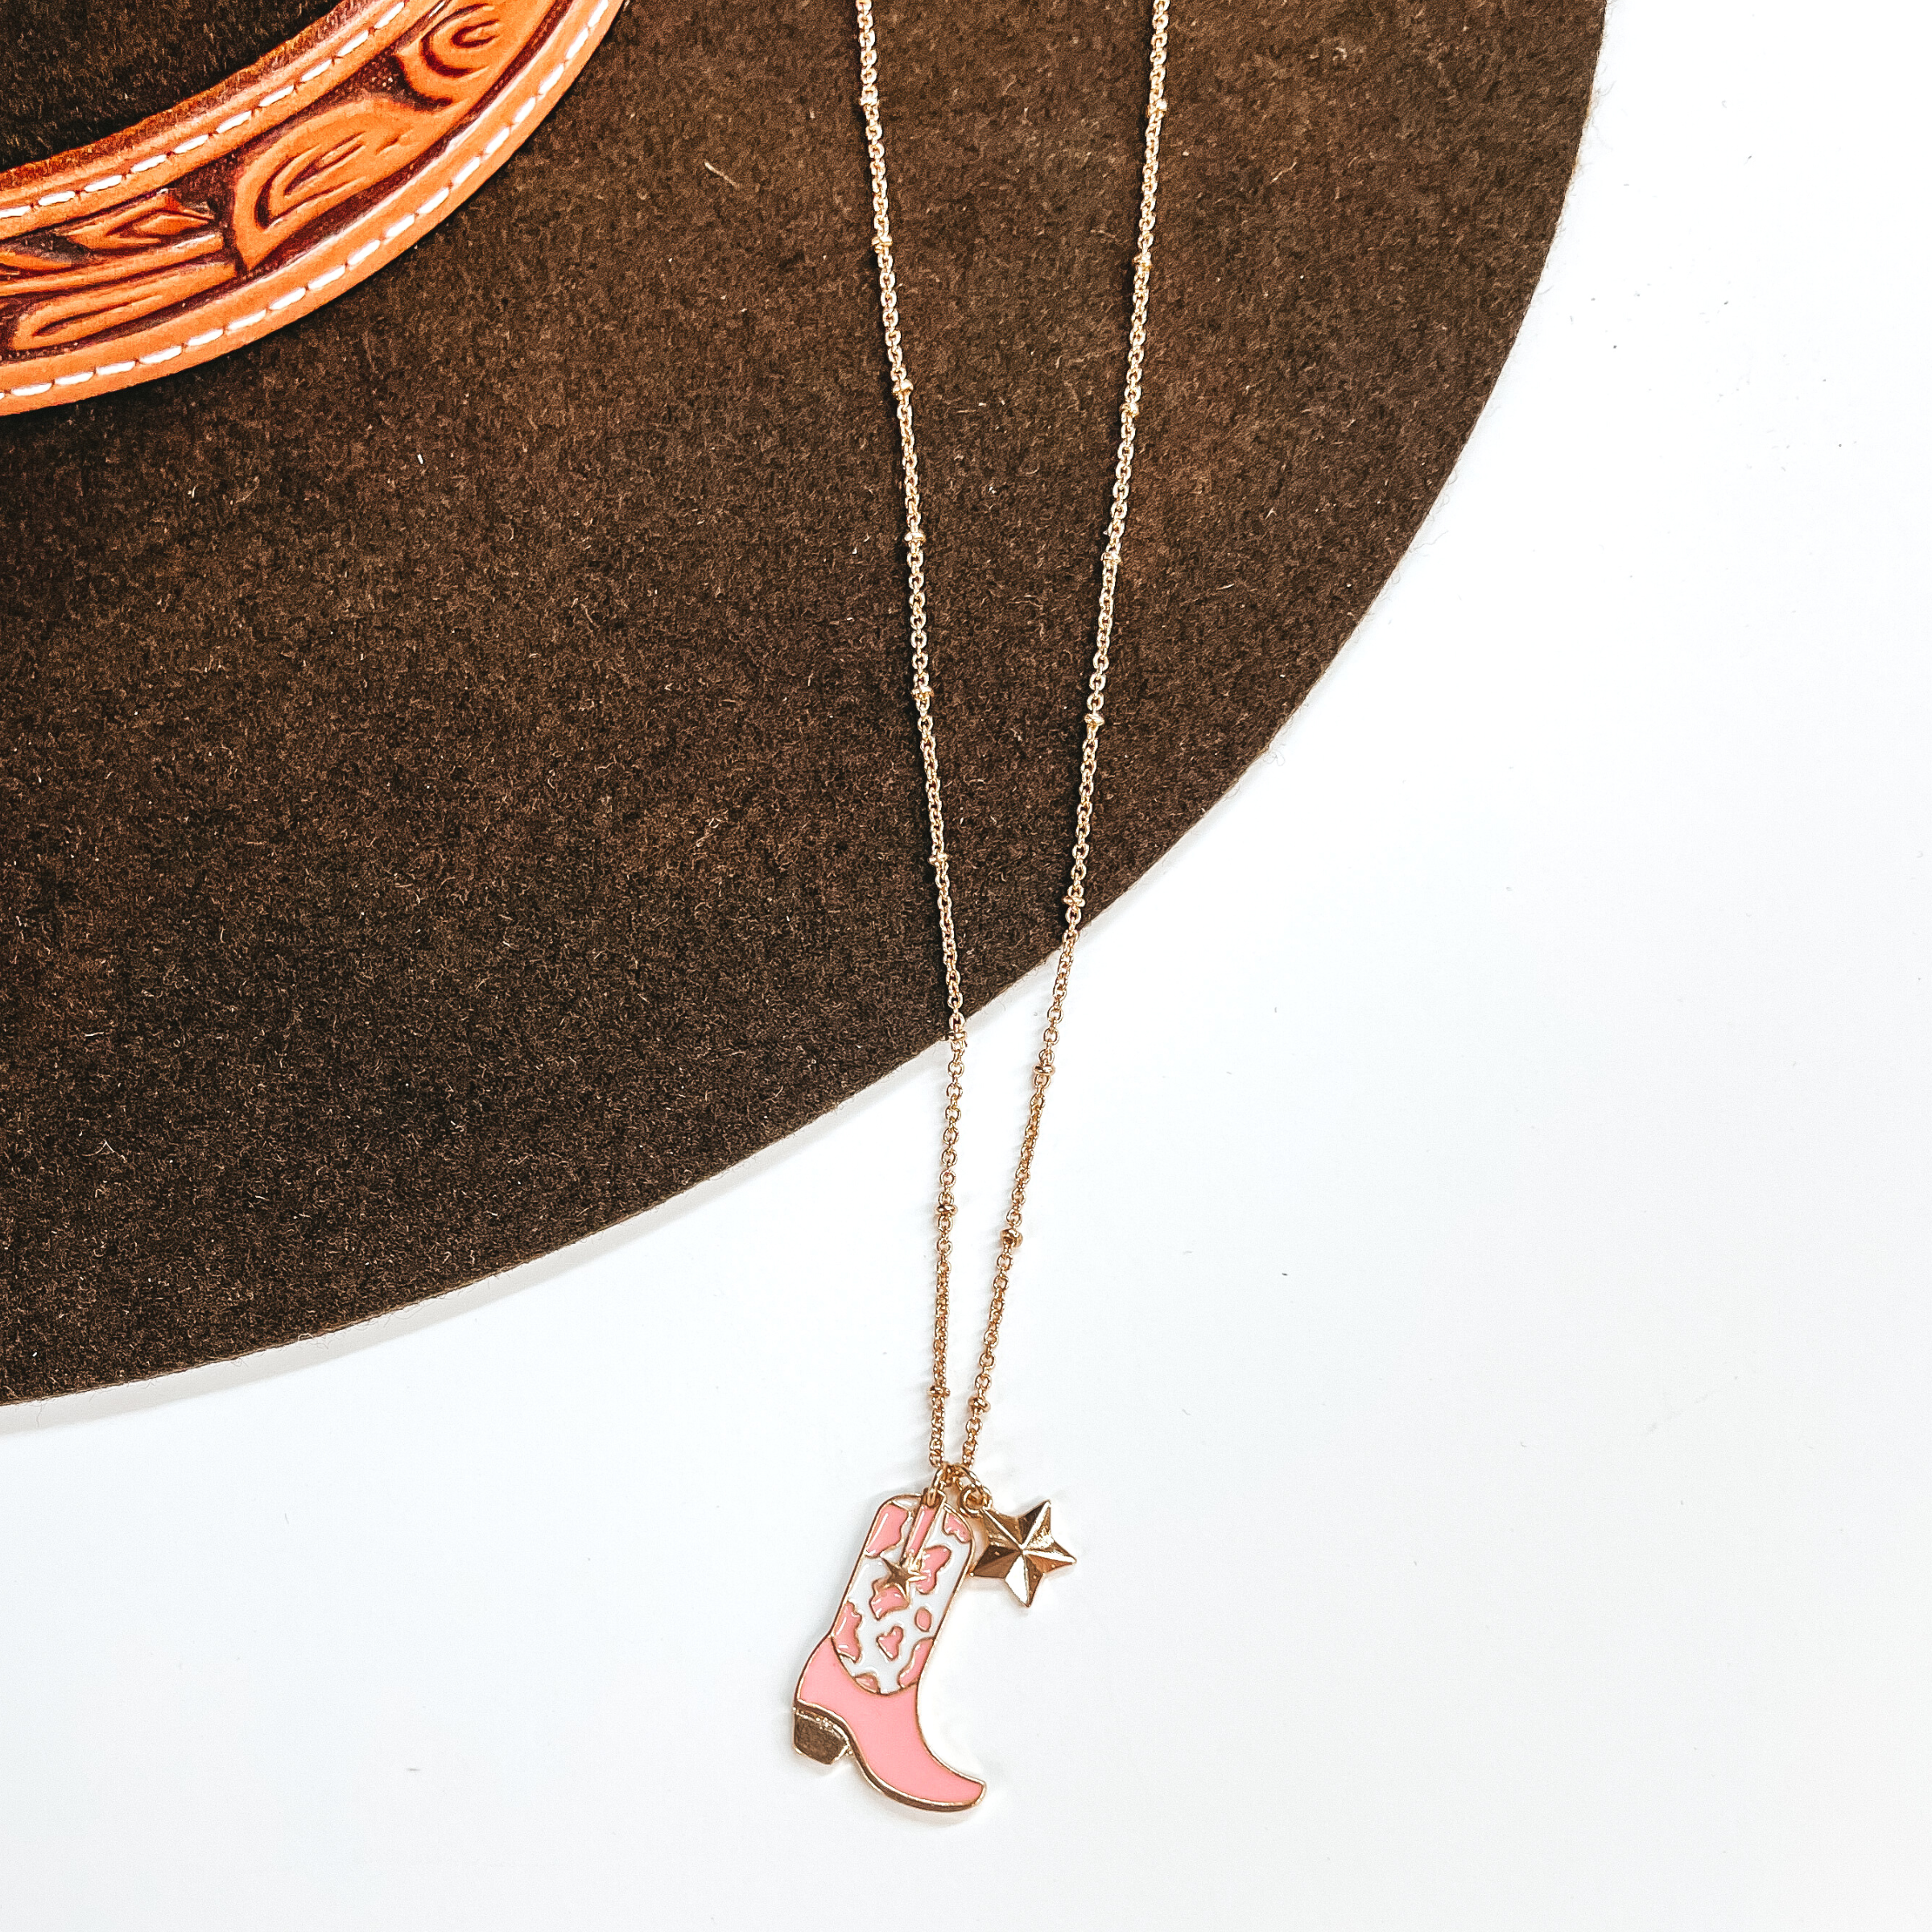 Kick Your Boots Up Gold Necklace with Cow Print Boot Pendant in White and Pink - Giddy Up Glamour Boutique